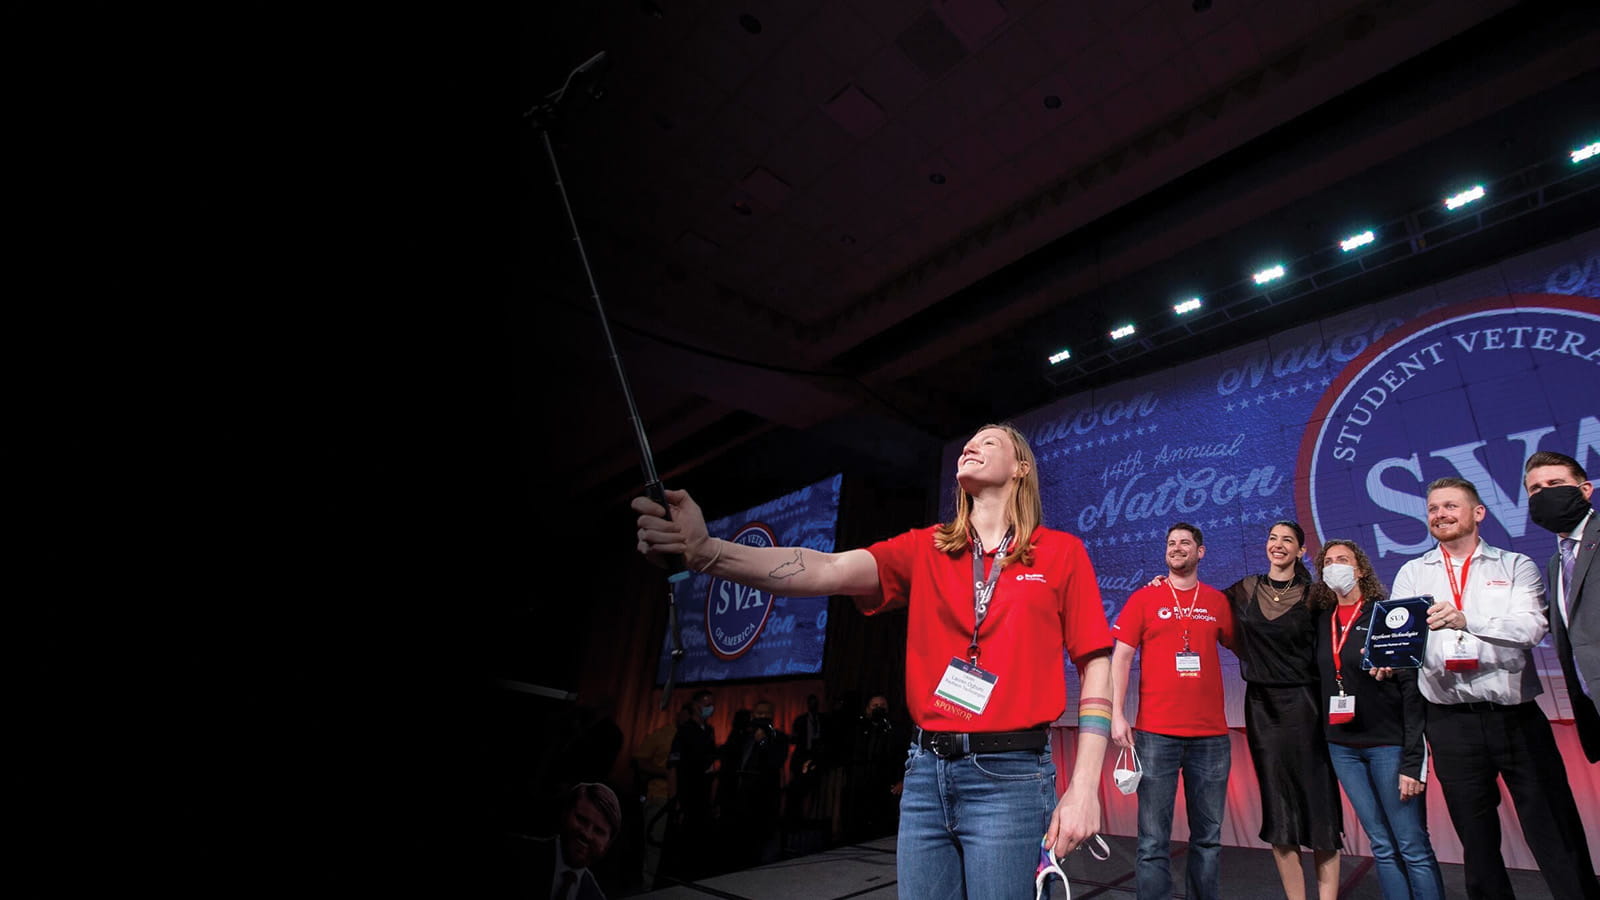 A group of Raytheon Technologies employees uses a selfie stick to take a photo onstage with their Corporate Partner of the Year award at the Student Veterans of America national conference.